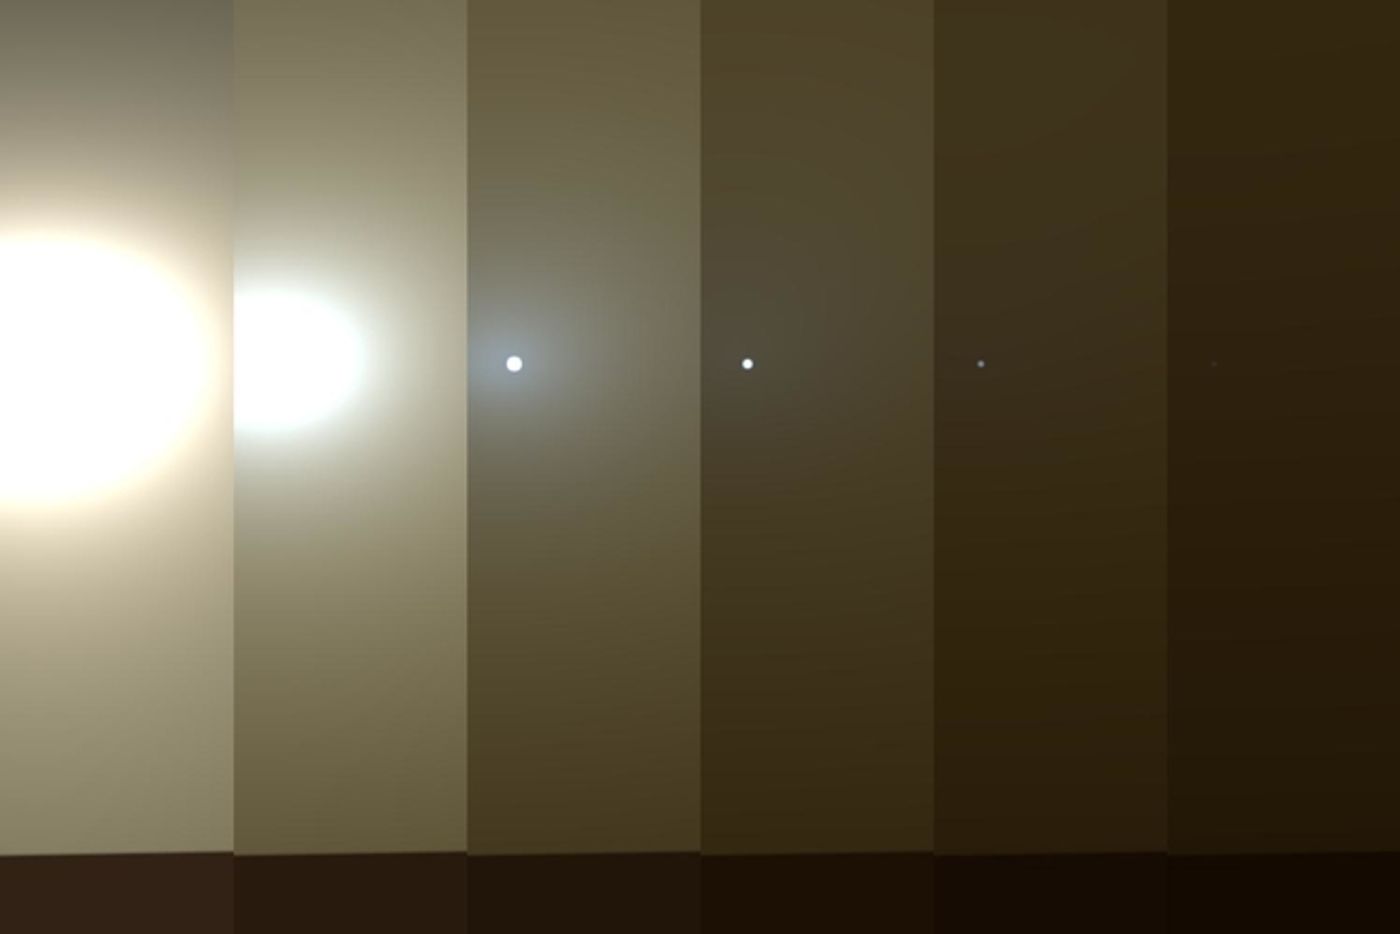 The dust surrounding Opportunity has intensified enough to block critical sunlight.